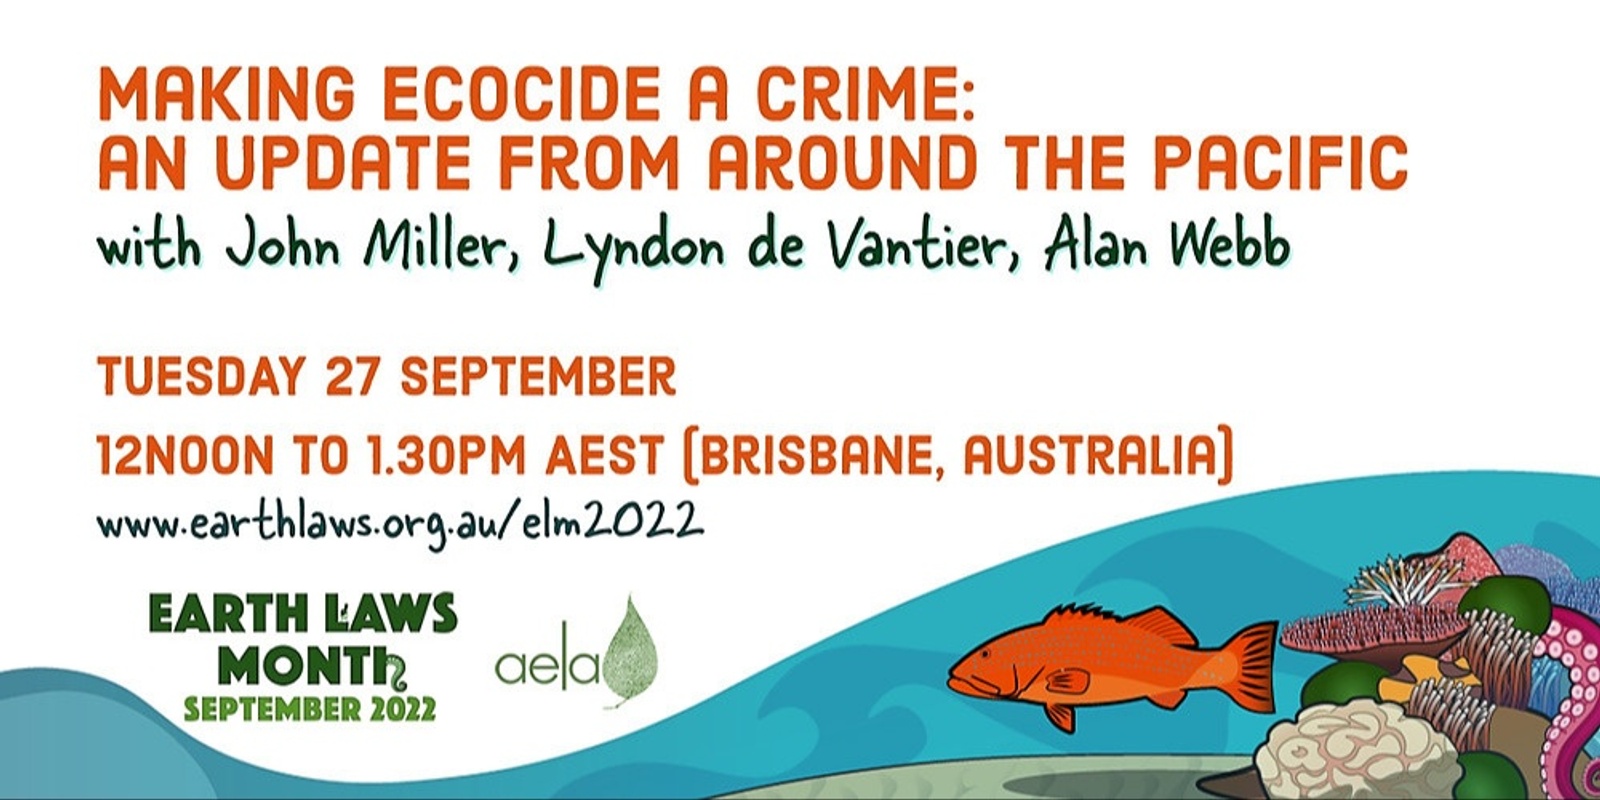 Banner image for Making Ecocide a Crime: An Update from around the Pacific with John Miller, Lyndon De Vantier, Alan Webb